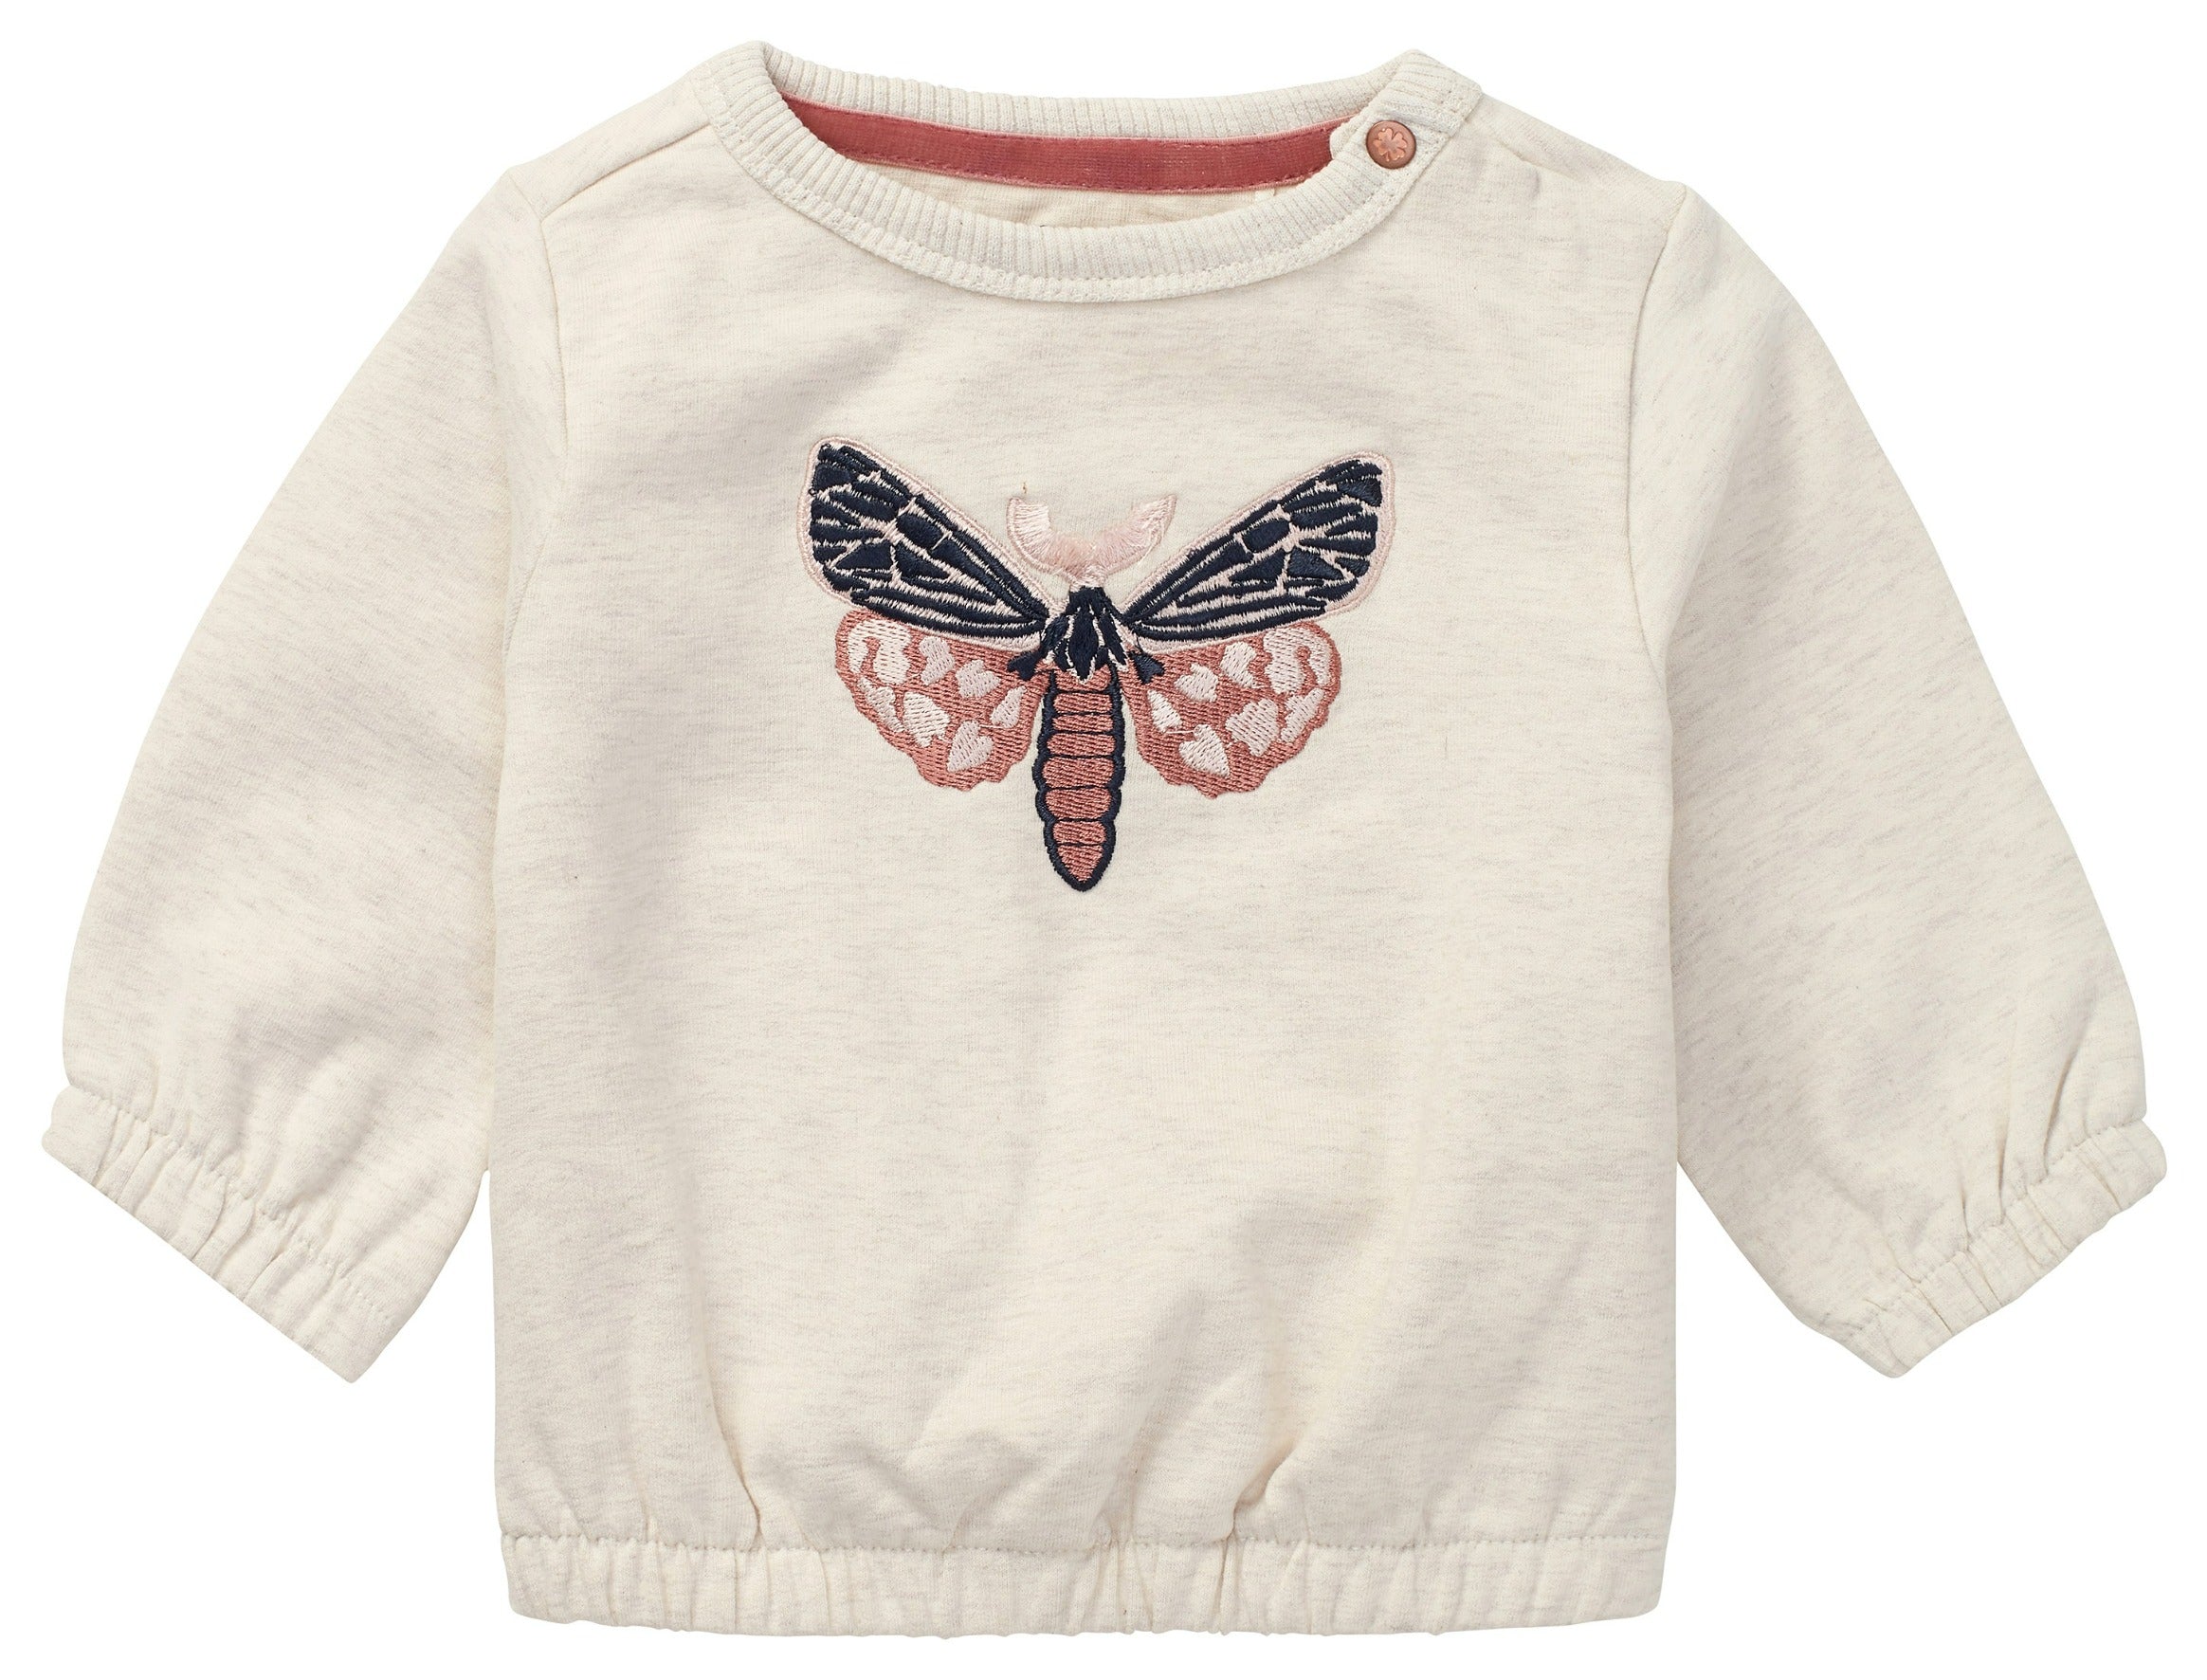 Dragonfly Sweater - Oatmeal